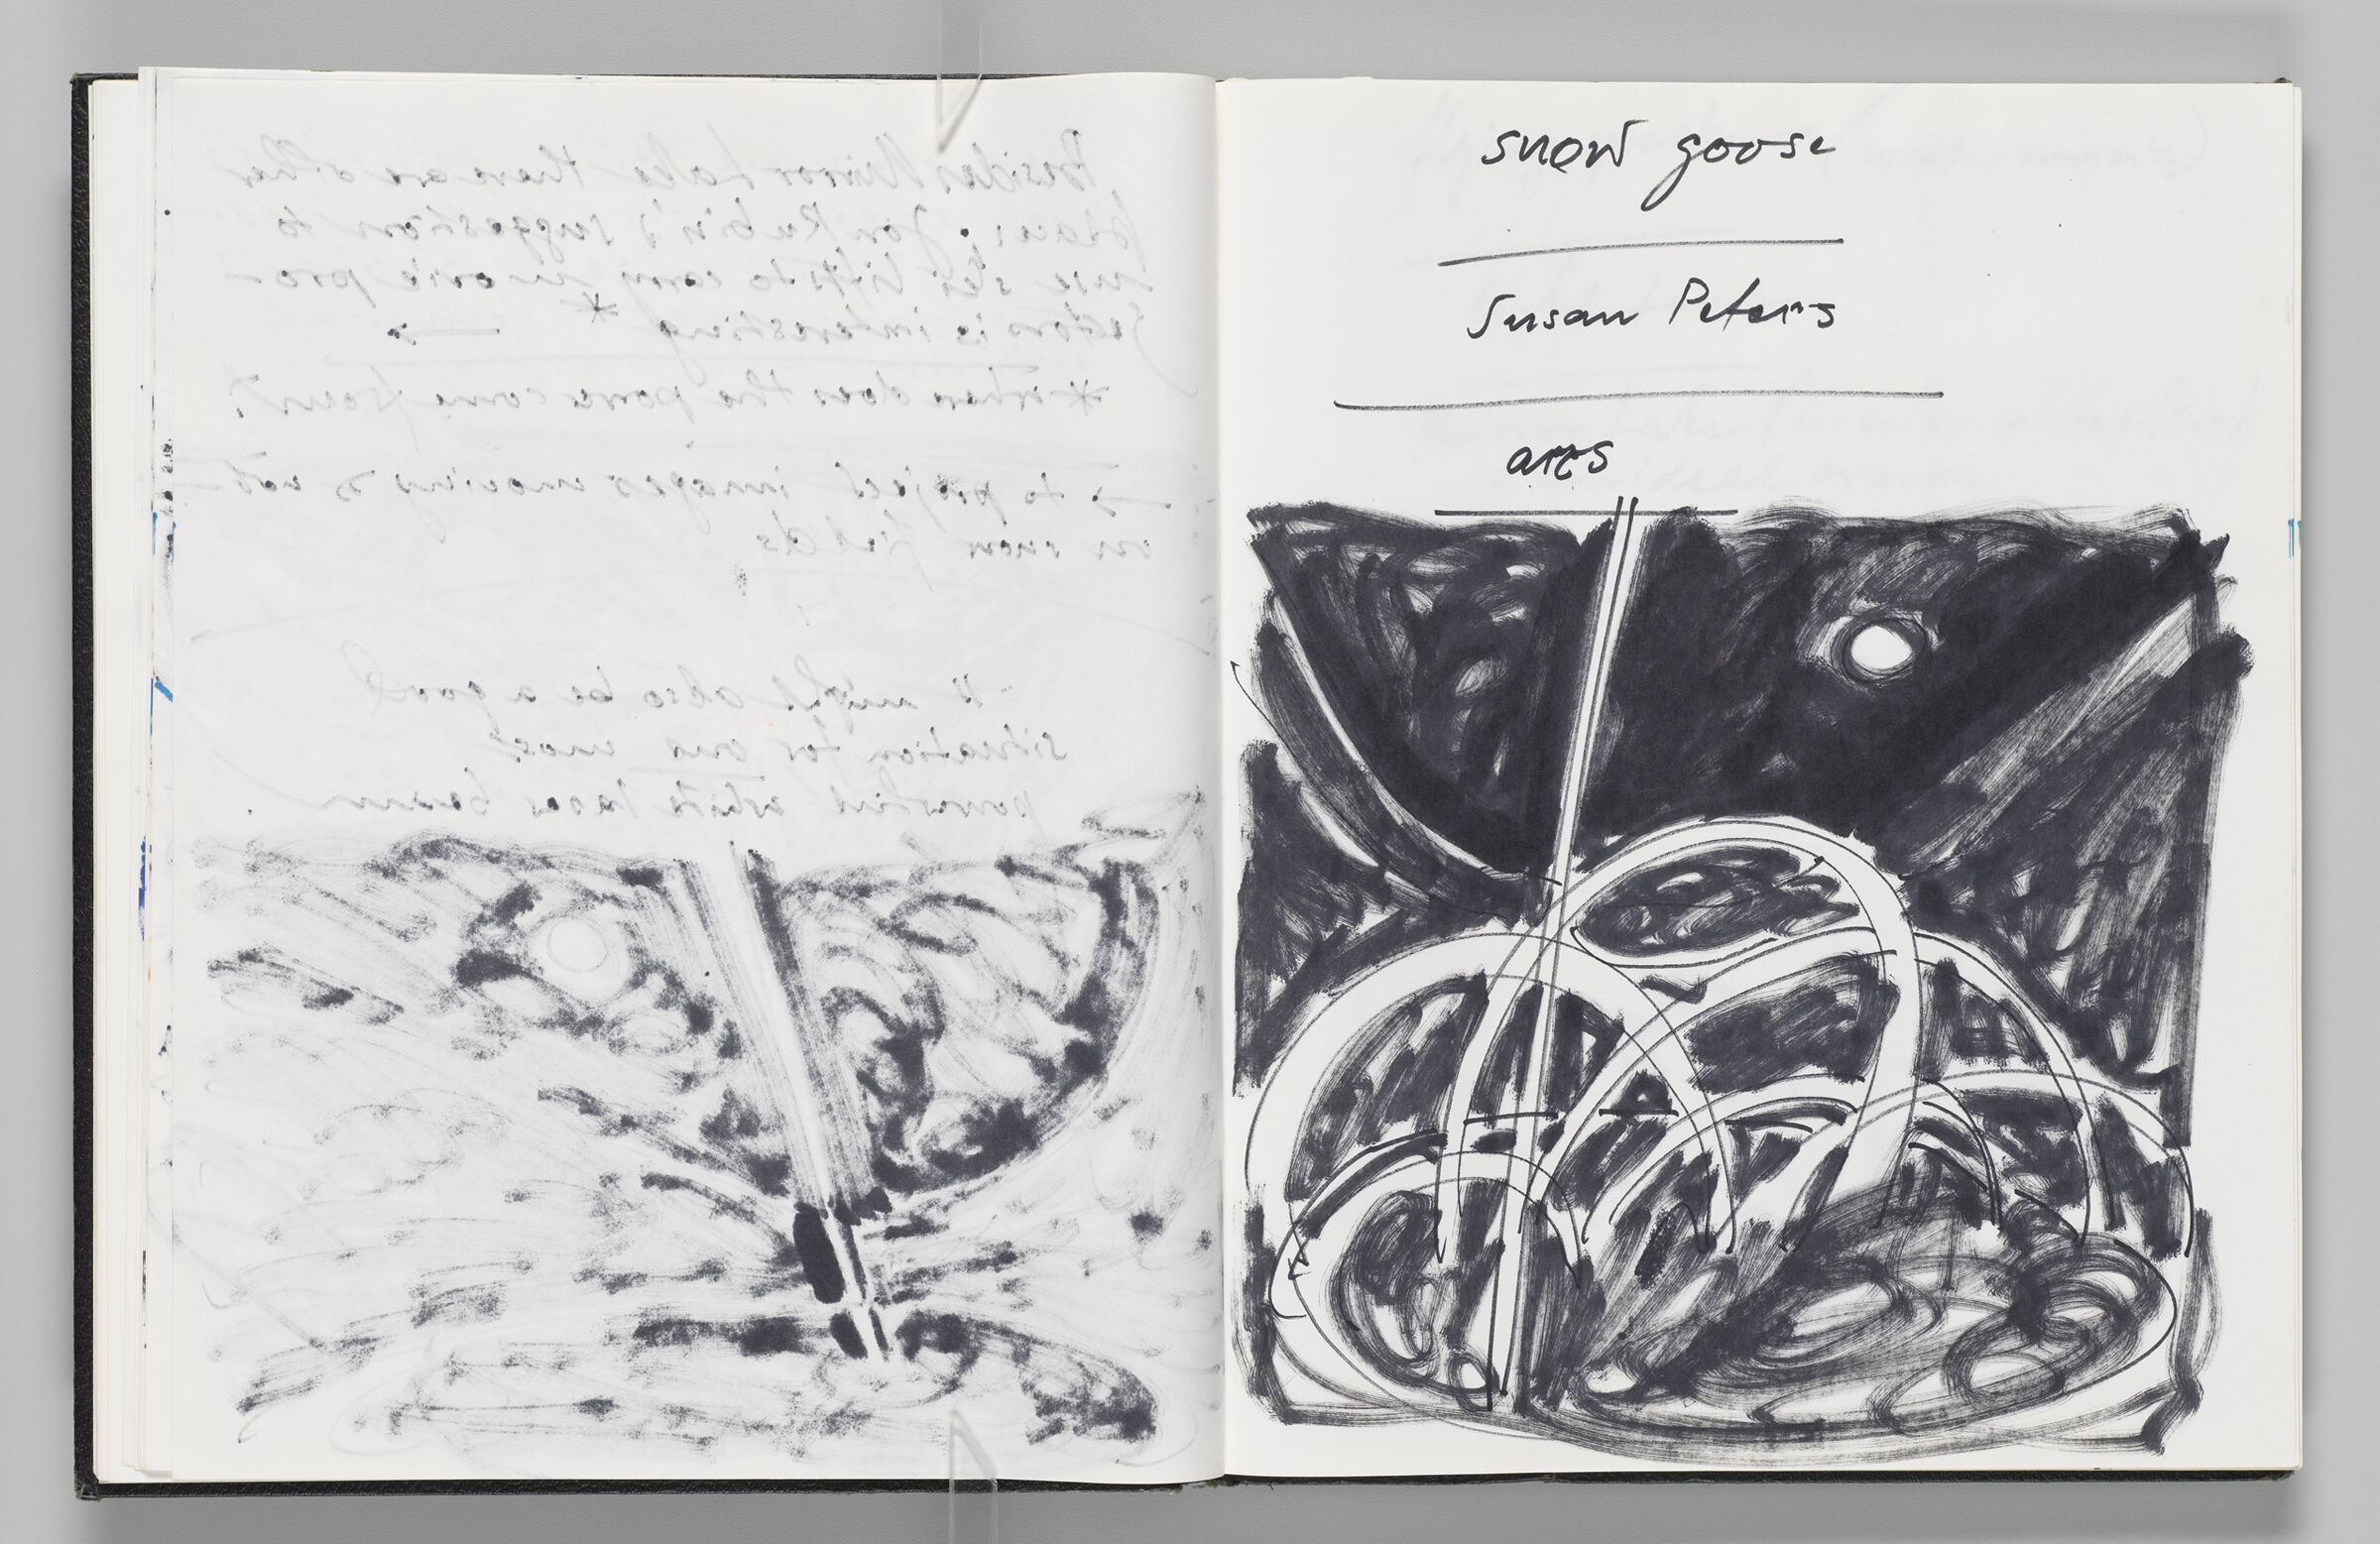 Untitled (Bleed-Through Of Previous Page, Left Page); Untitled (Design For Arcs On Mirror Lake, Right Page)